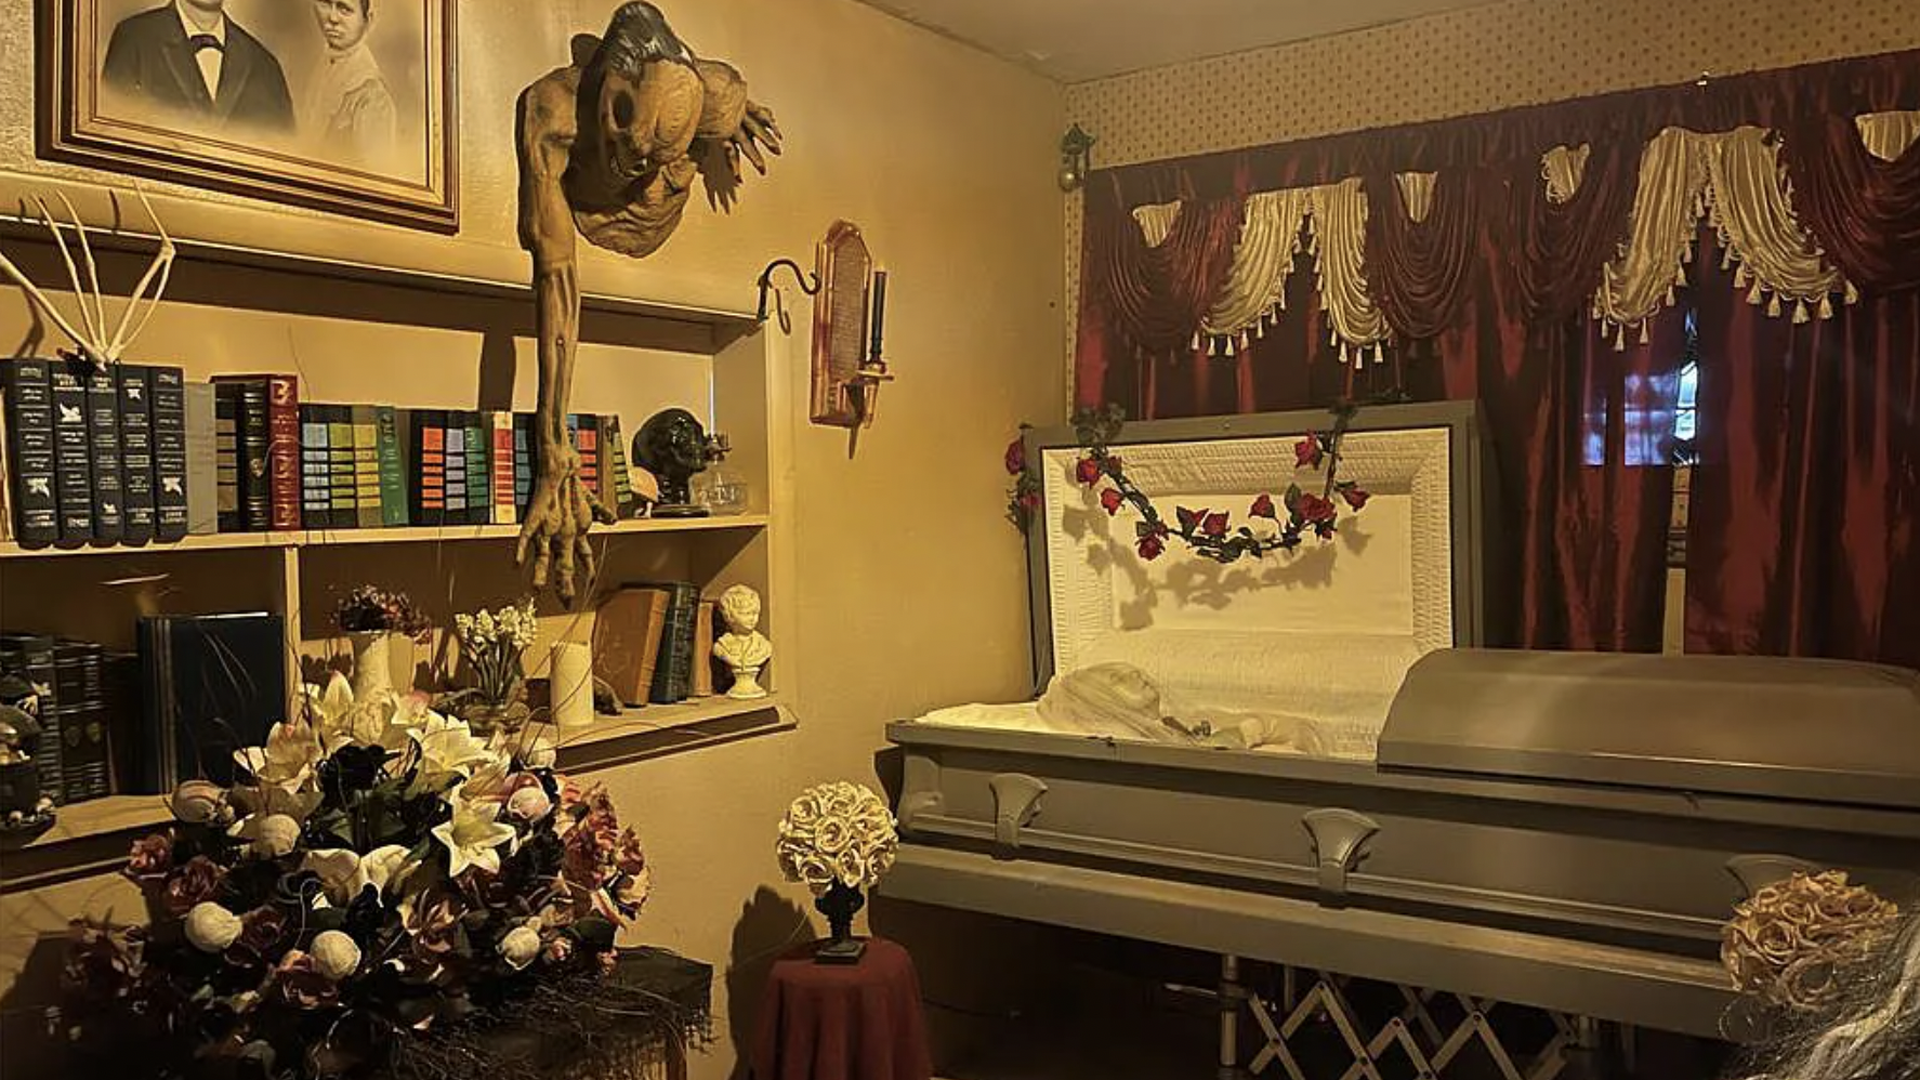 A bedroom with a coffin and flowers and scary red drapes